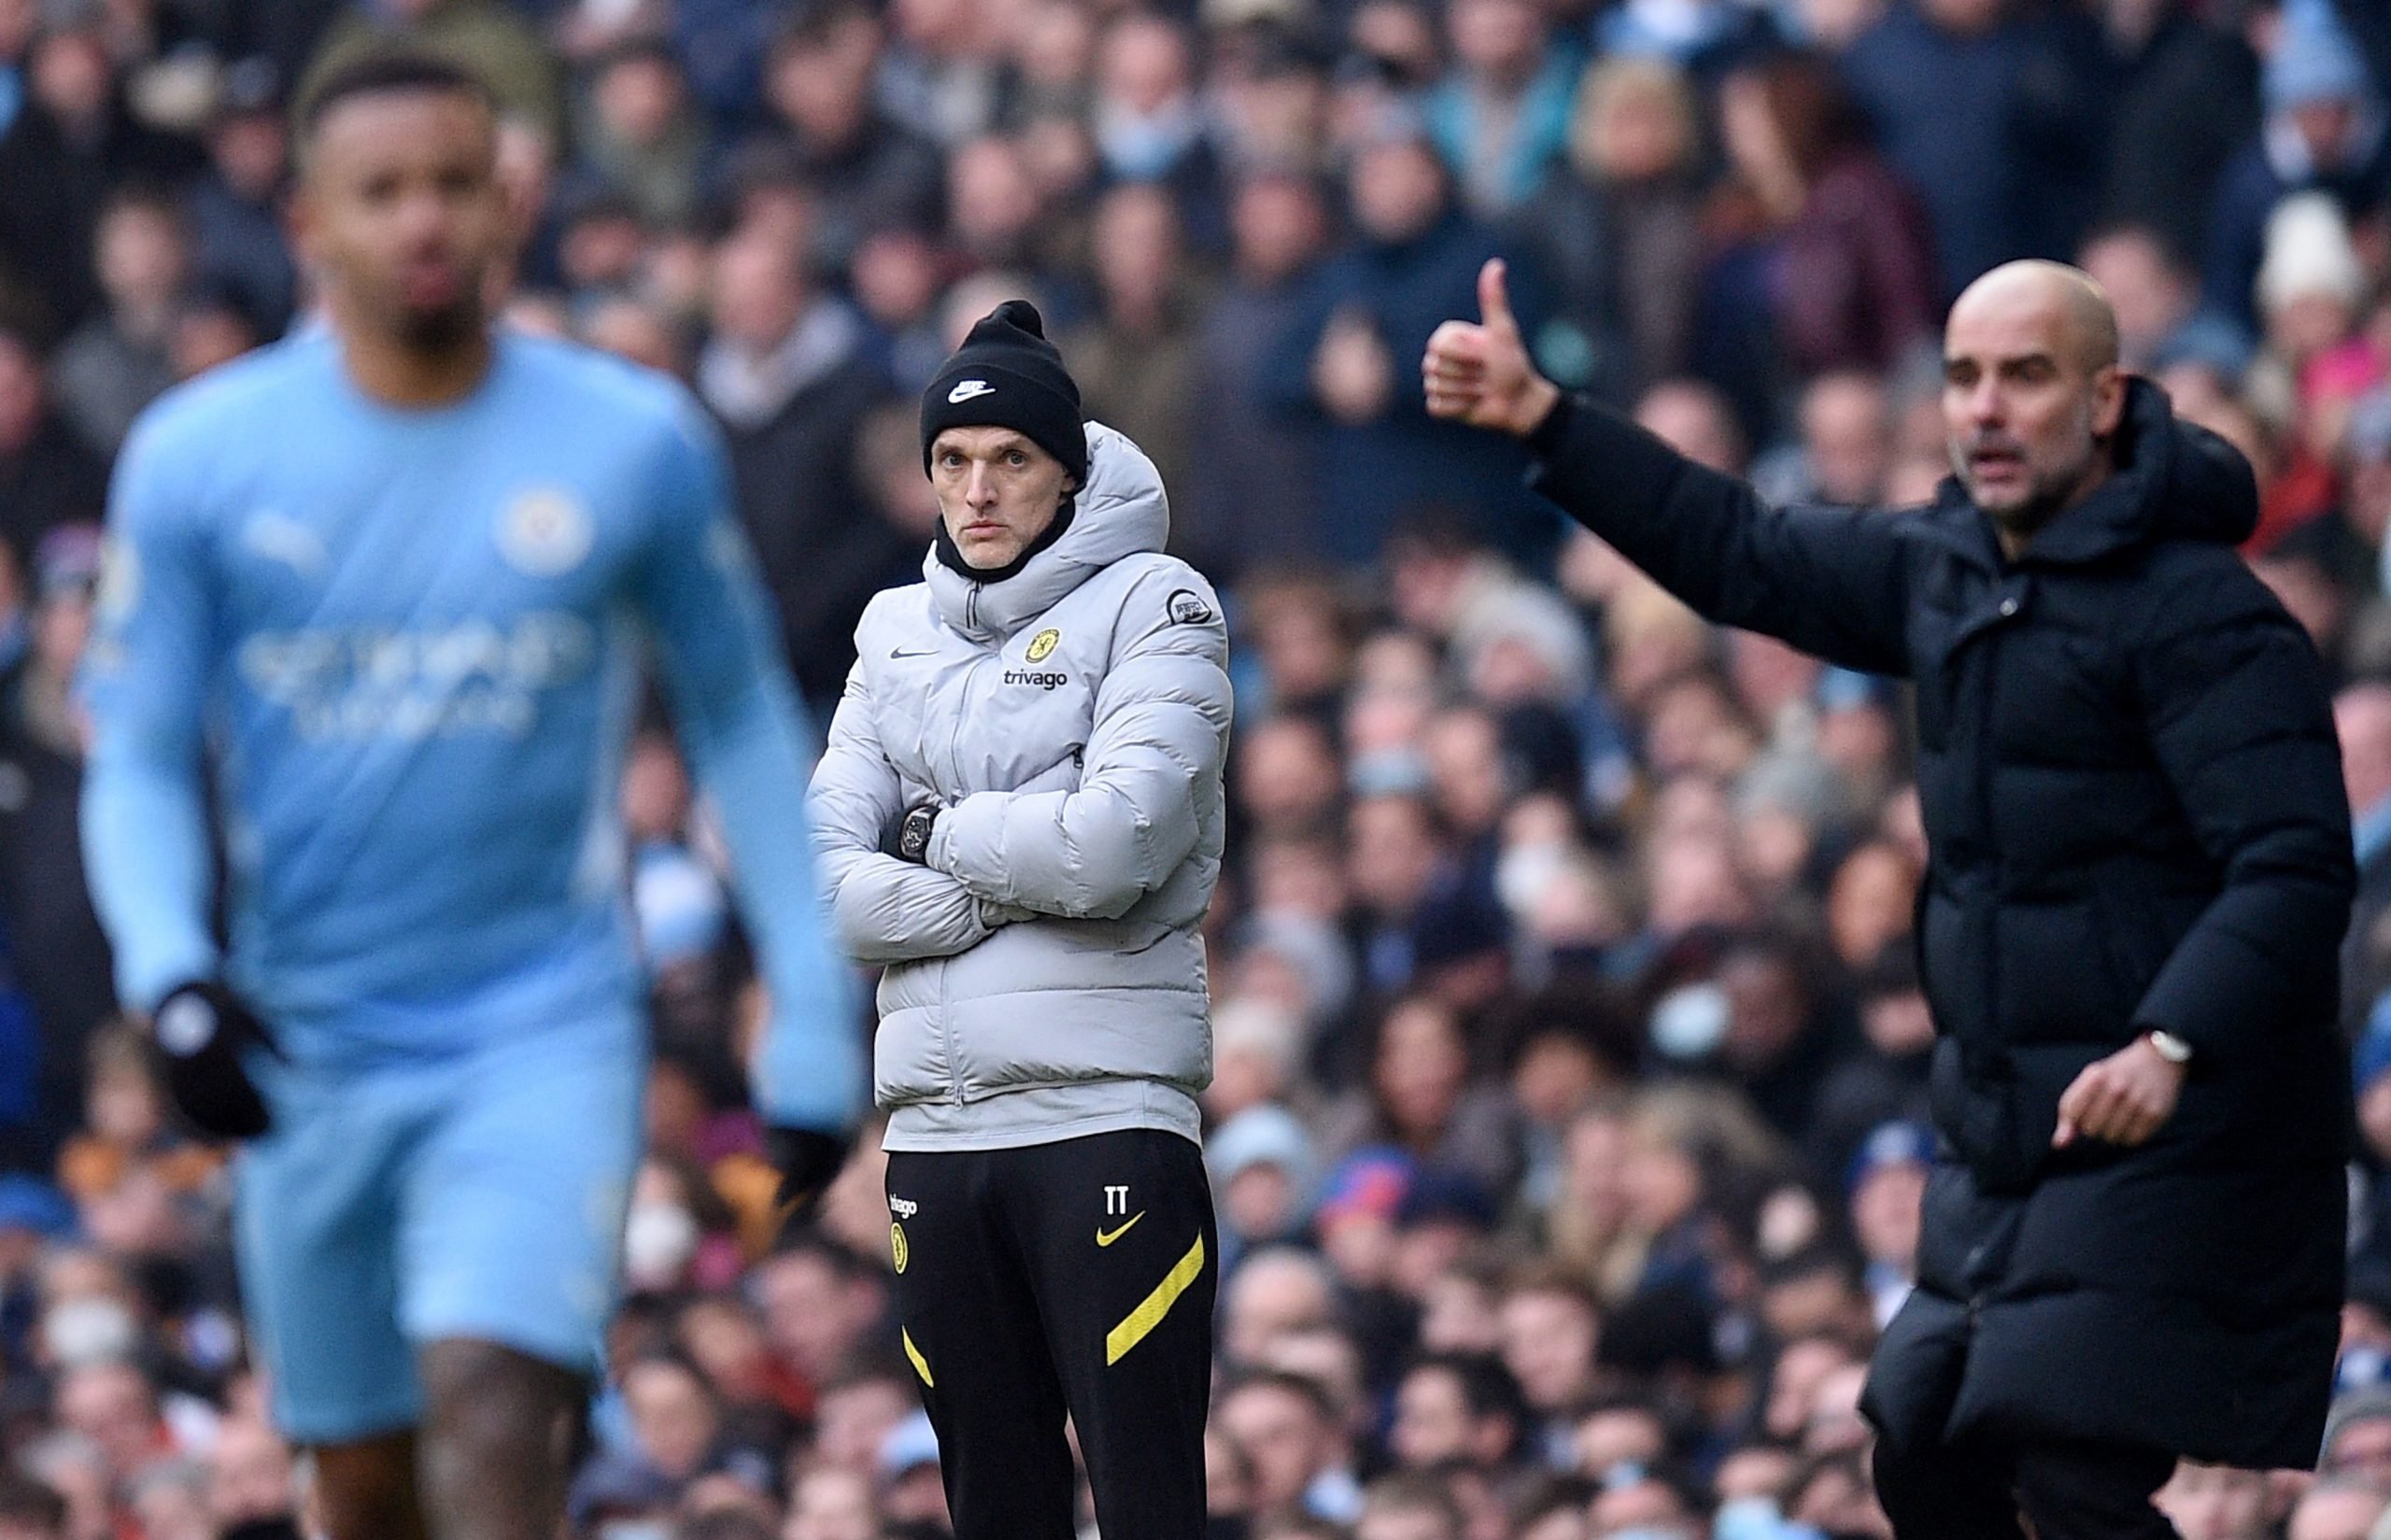 Tuchel says three Chelsea players need 'to show more quality' after Manchester City defeat